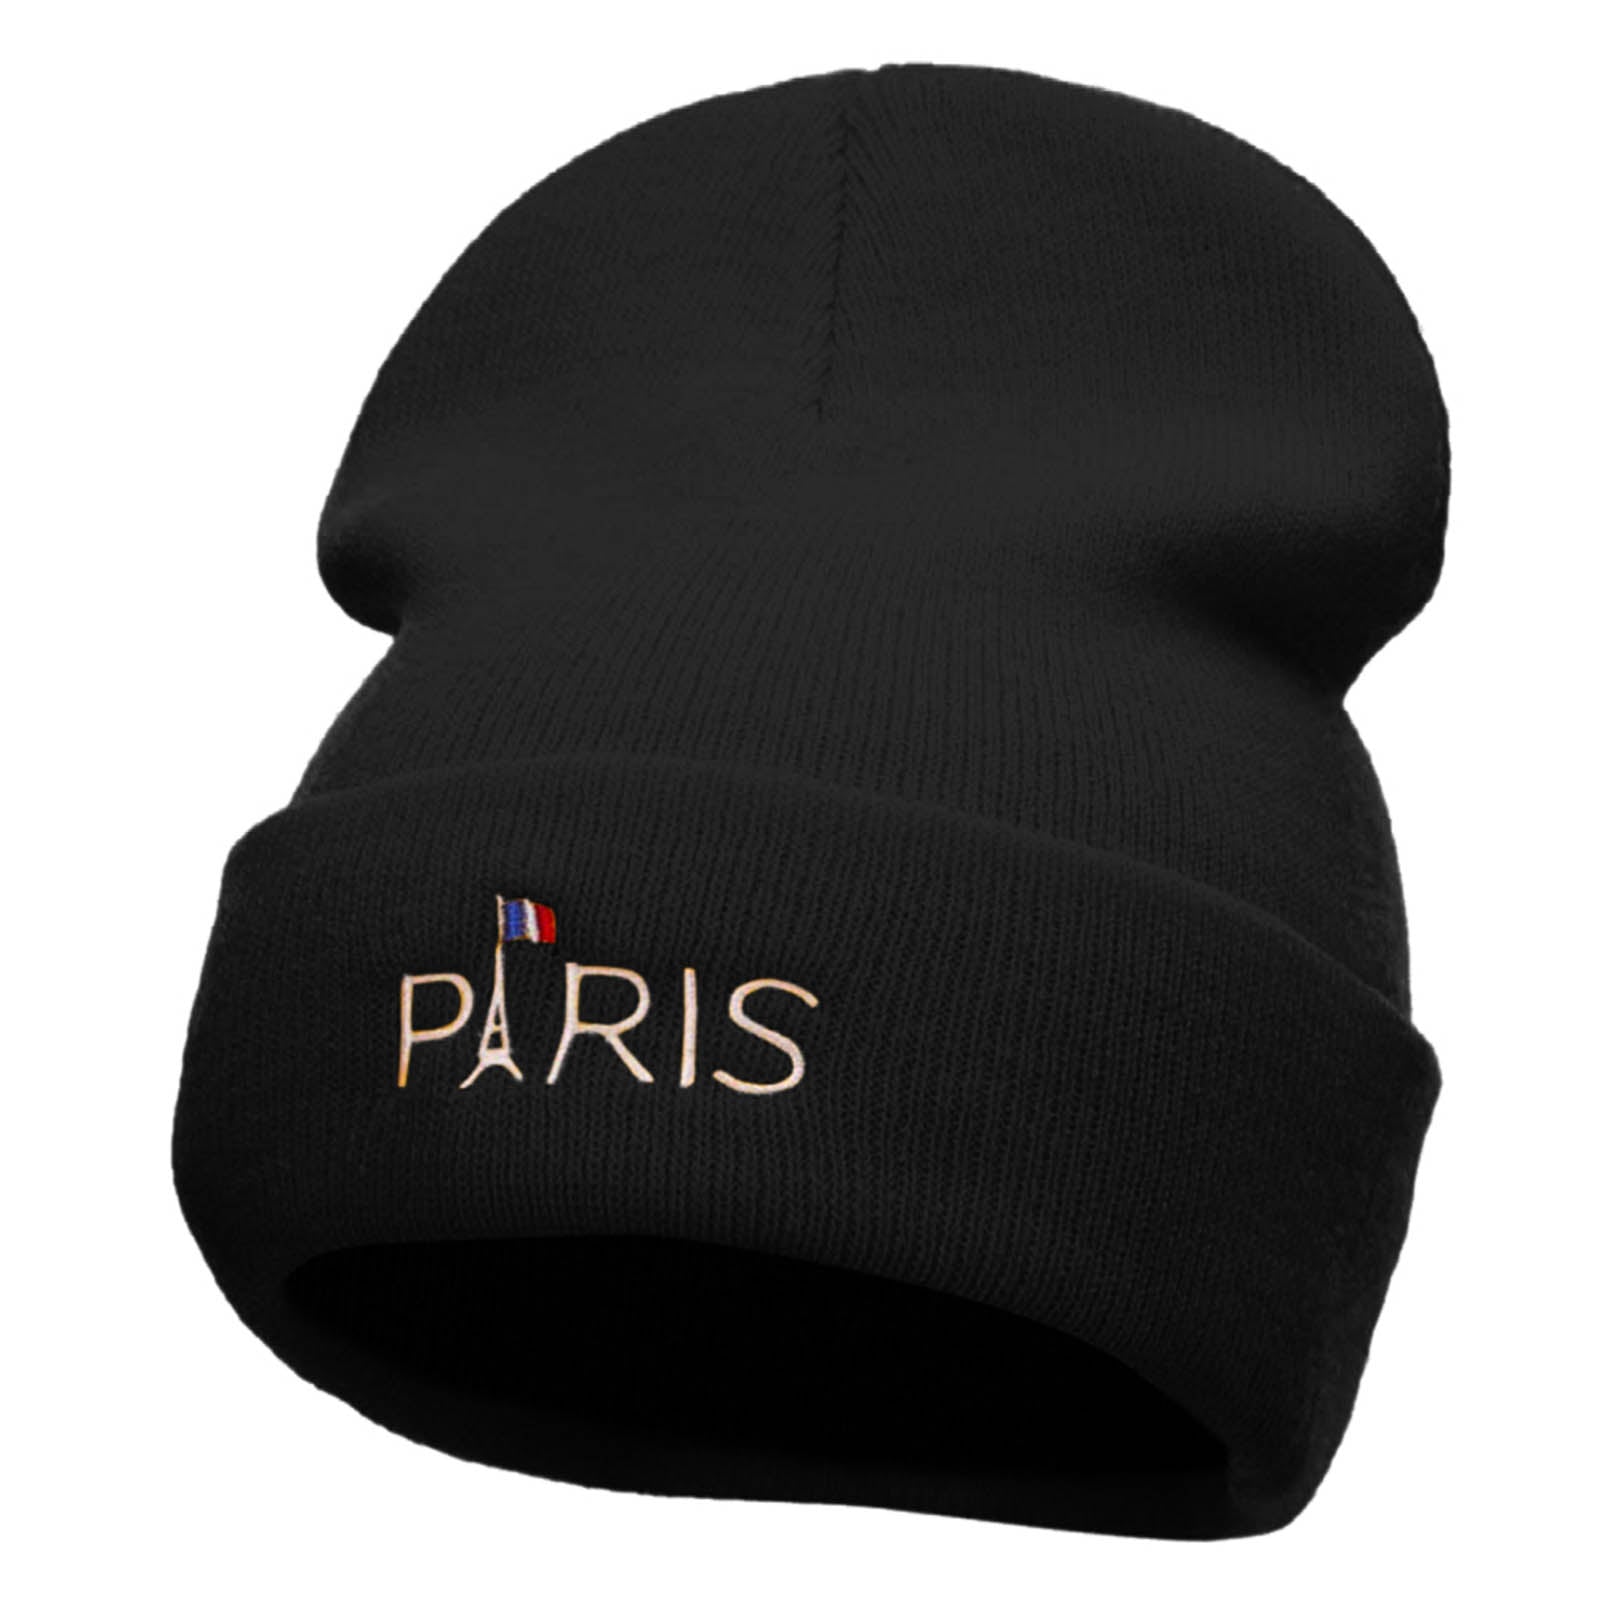 Eiffle Tower Paris Embroidered 12 Inch Long Knitted Beanie - Black OSFM